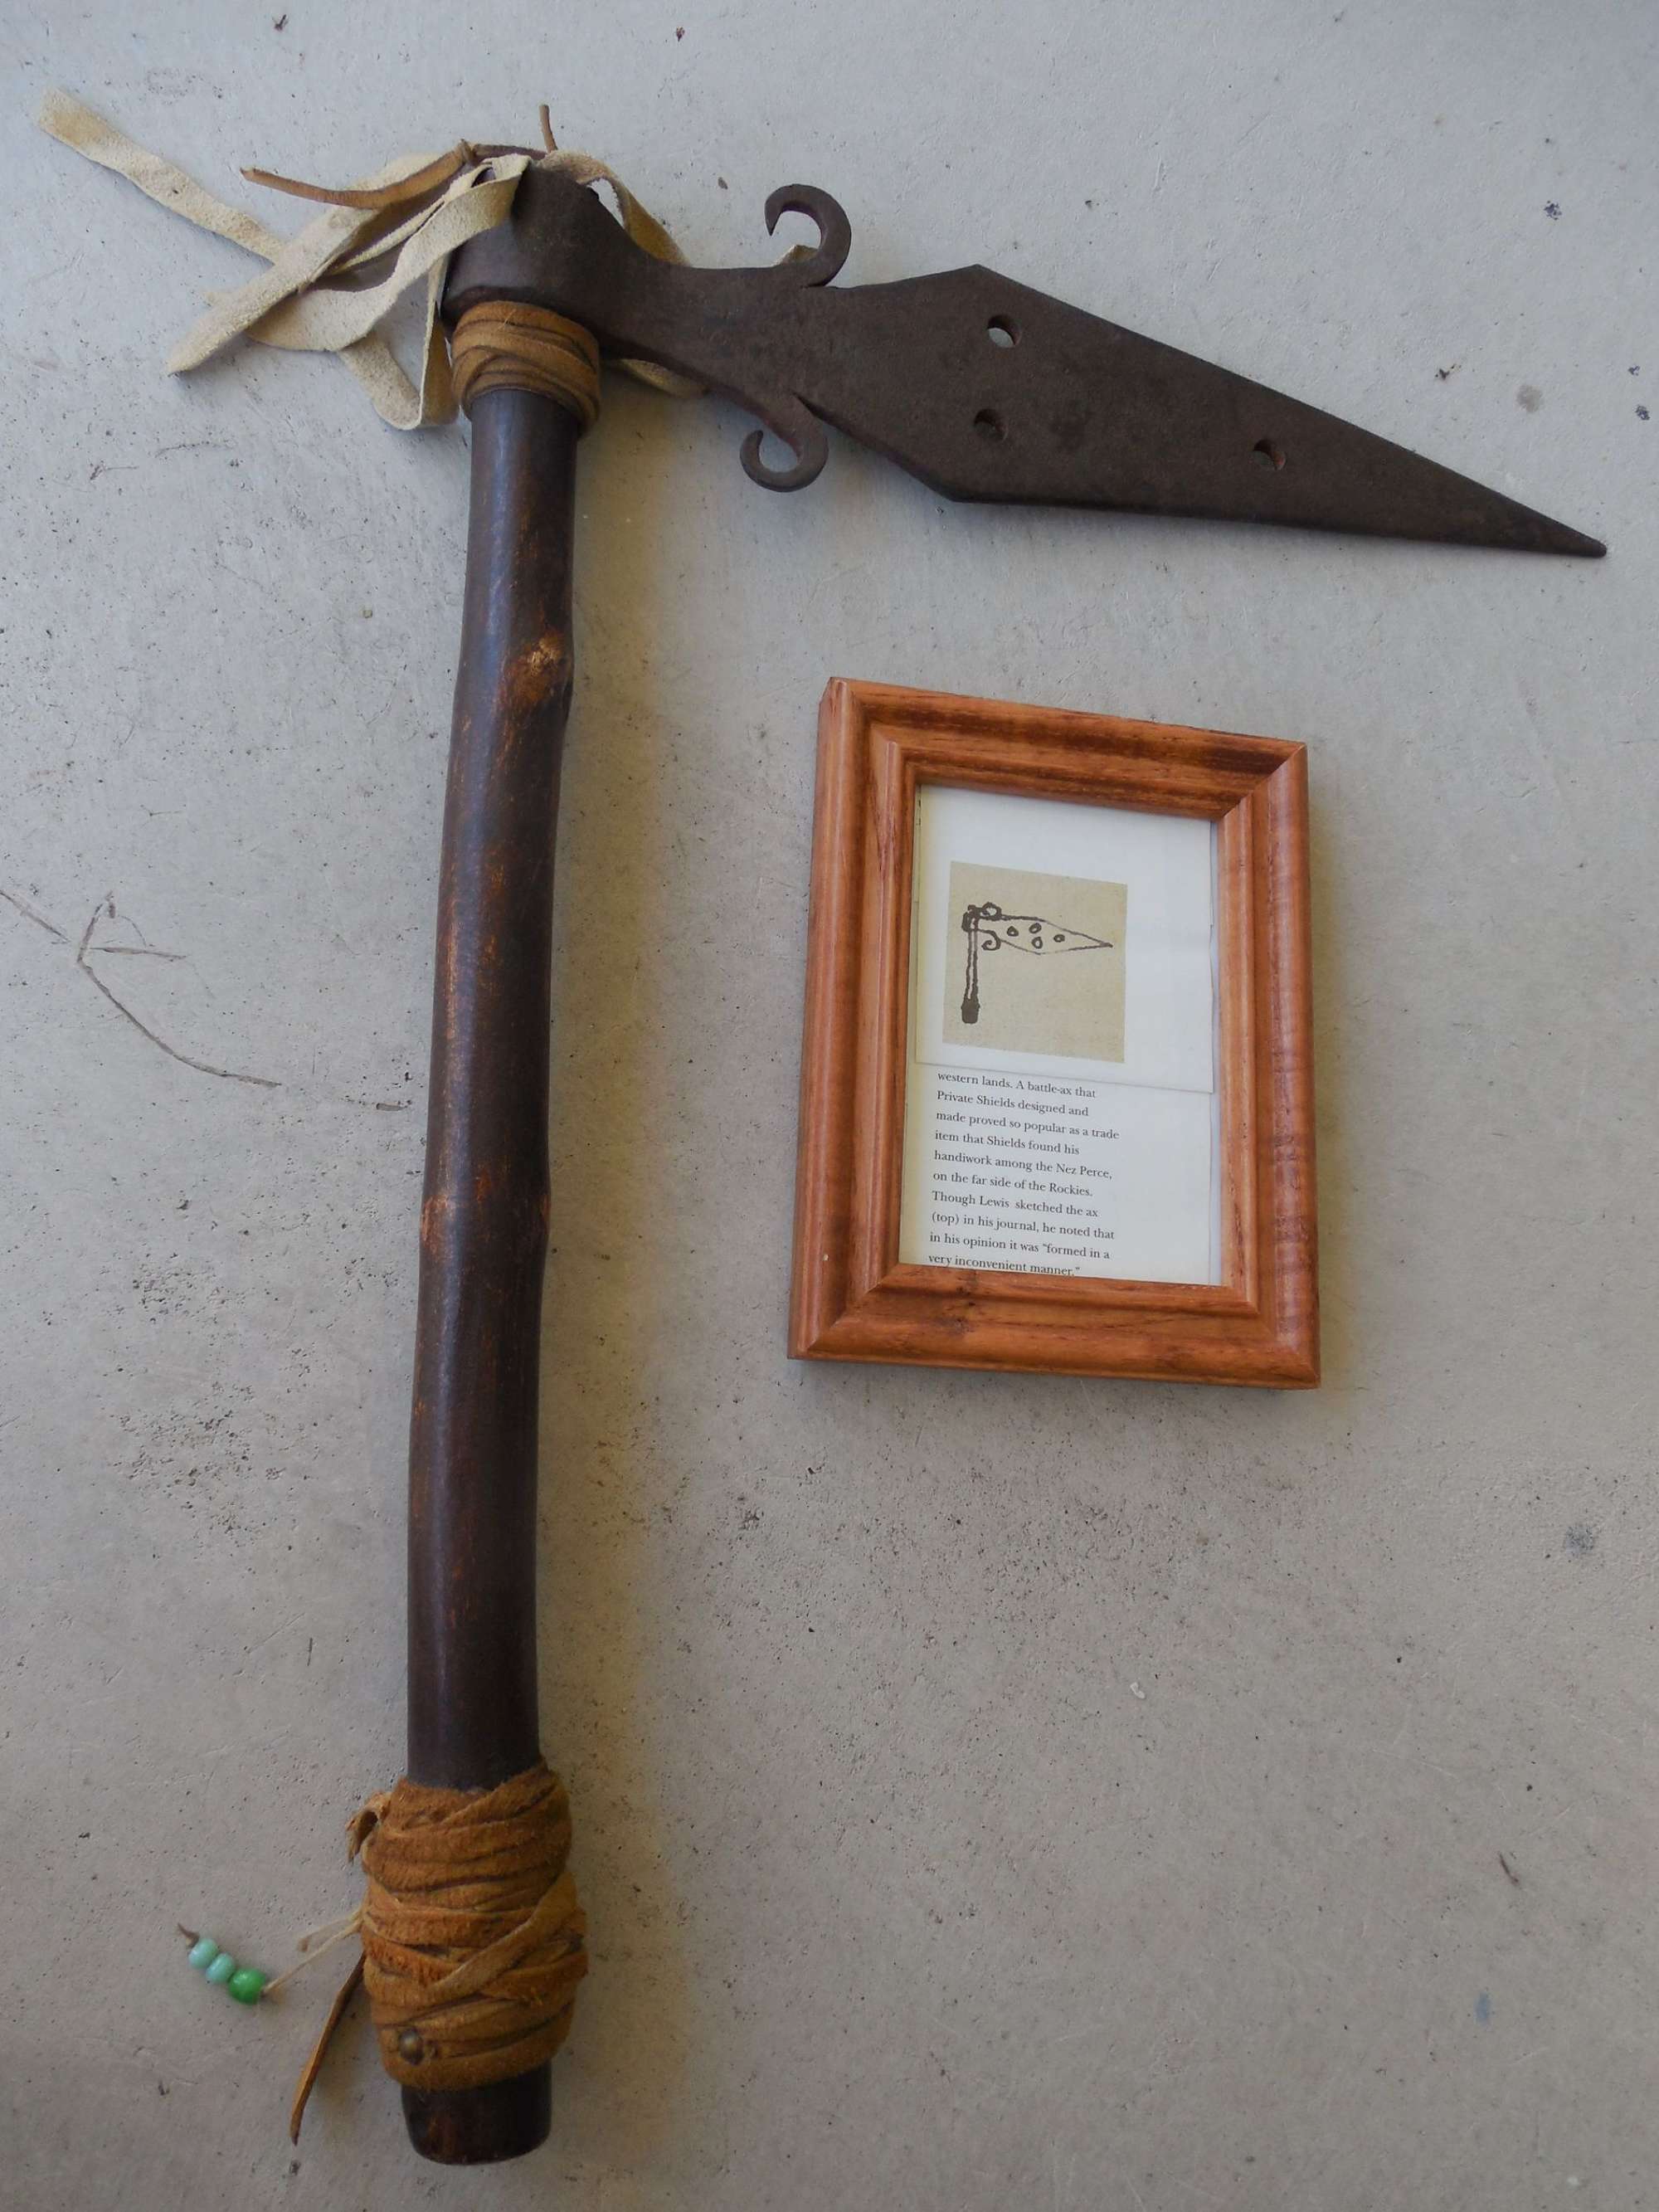 ﻿Historically Significant Lewis and Clark Expedition Spontoon Tomahawk